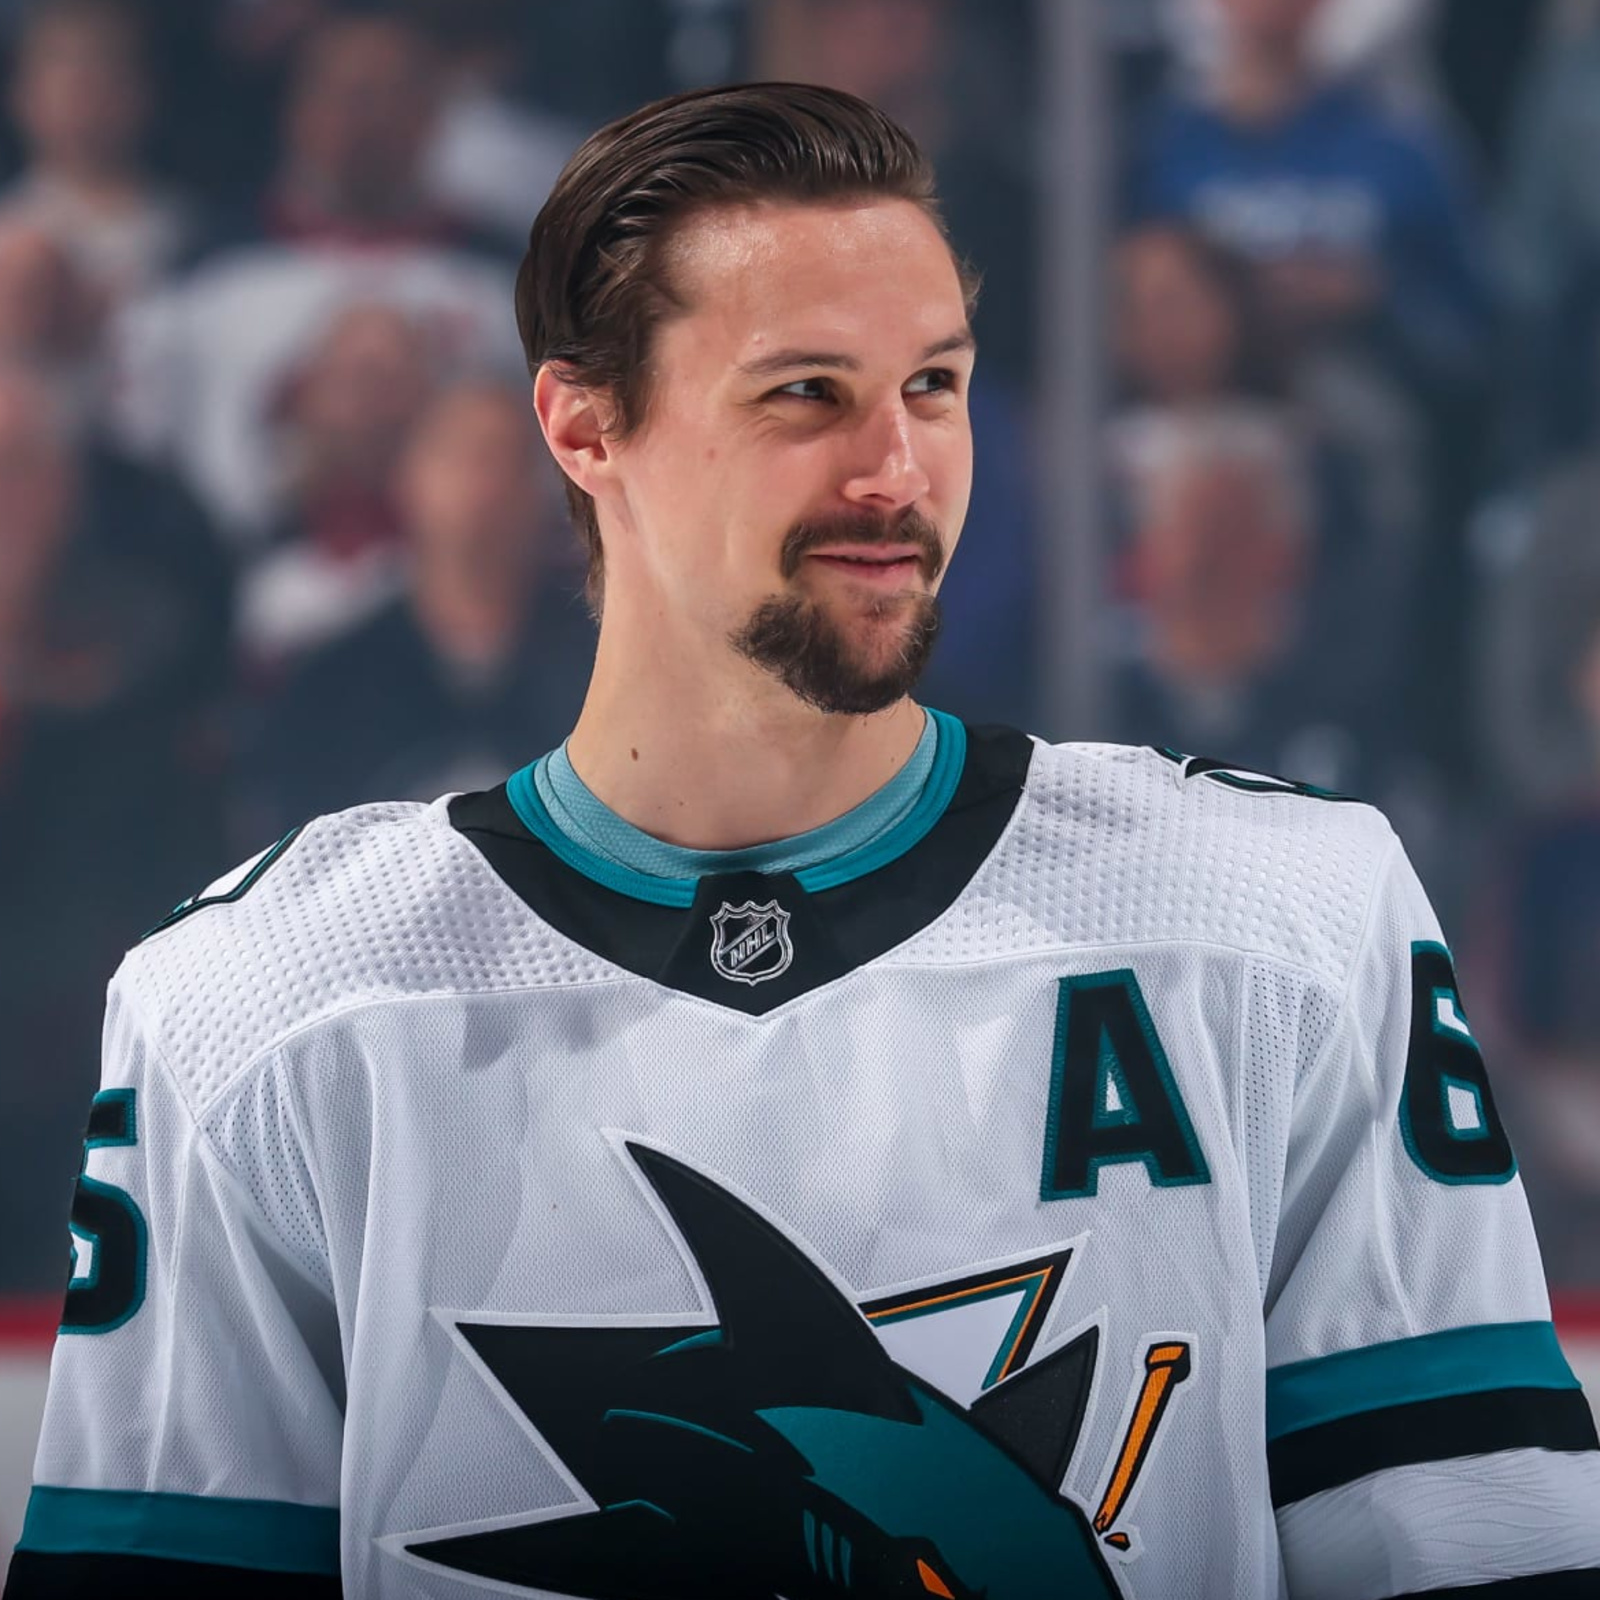 SPECULATION: What's Reasonable Karlsson to Penguins Trade?